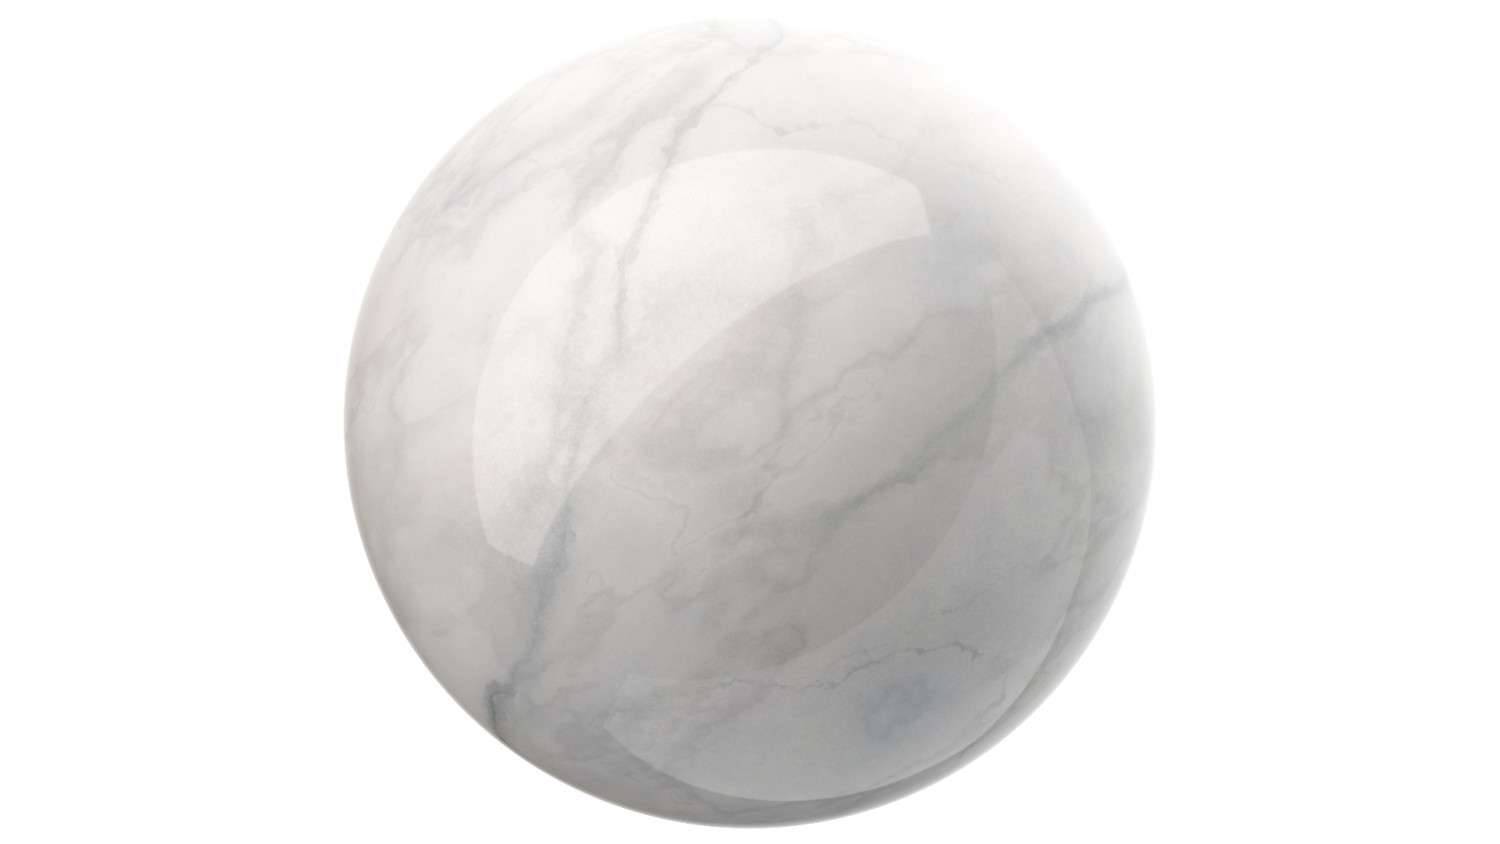 Soft white marble texture